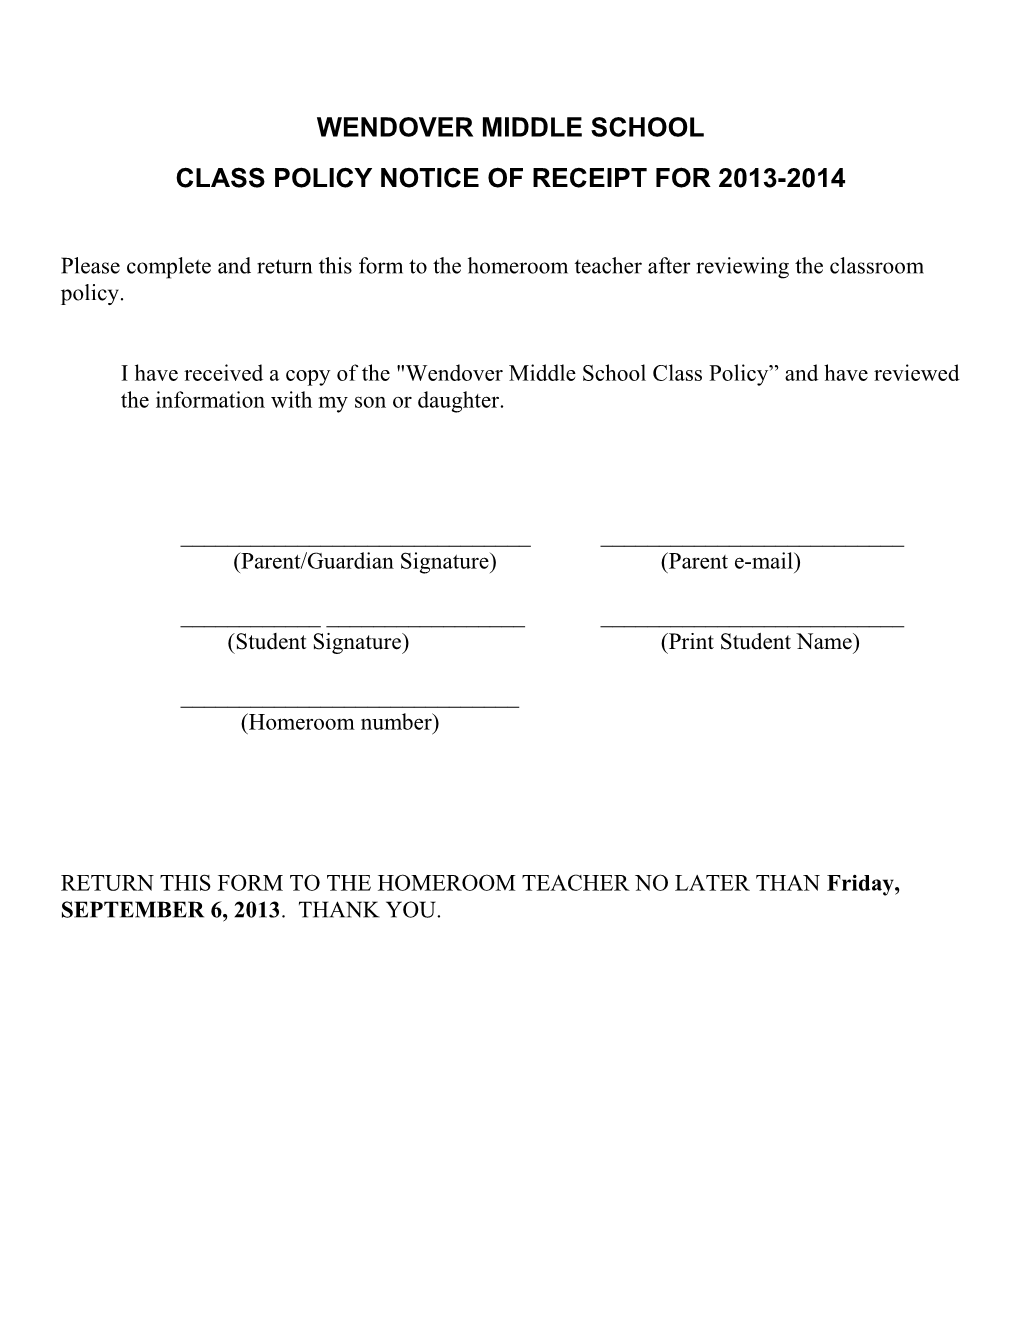 Class Policy Notice of Receipt for 2013-2014